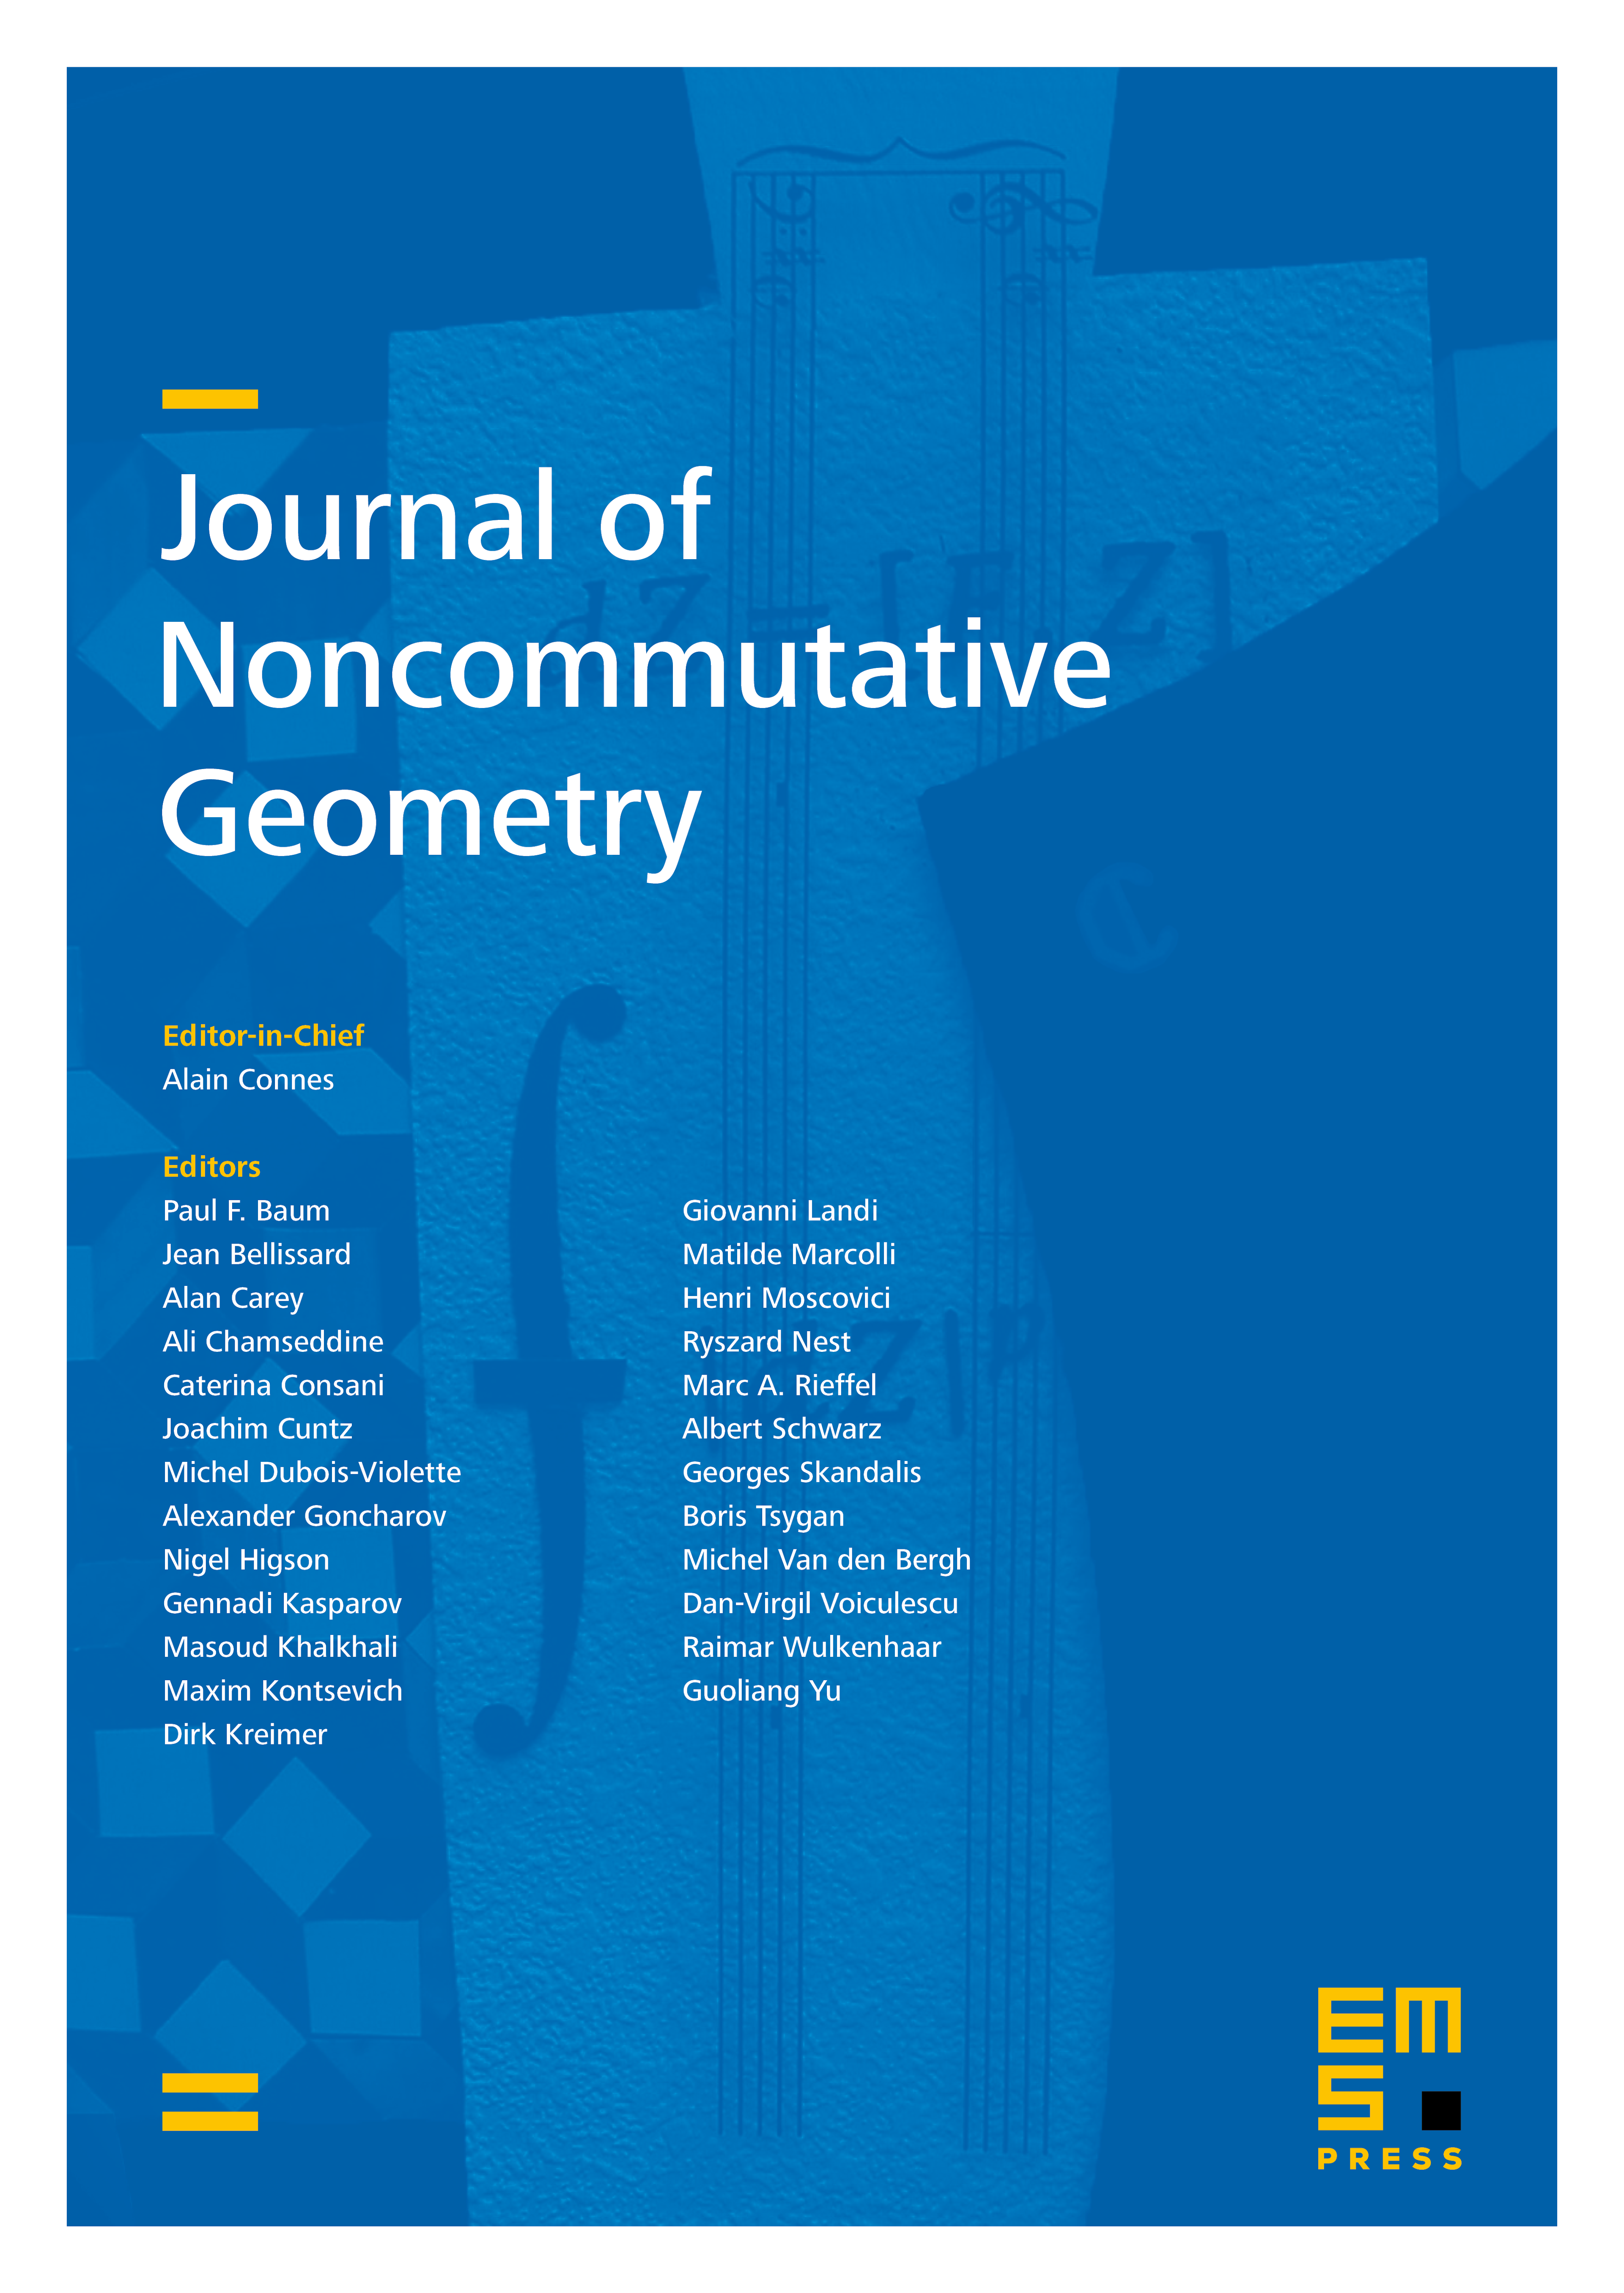 Noncommutative Riemannian geometry and diffusion on ultrametric Cantor sets cover